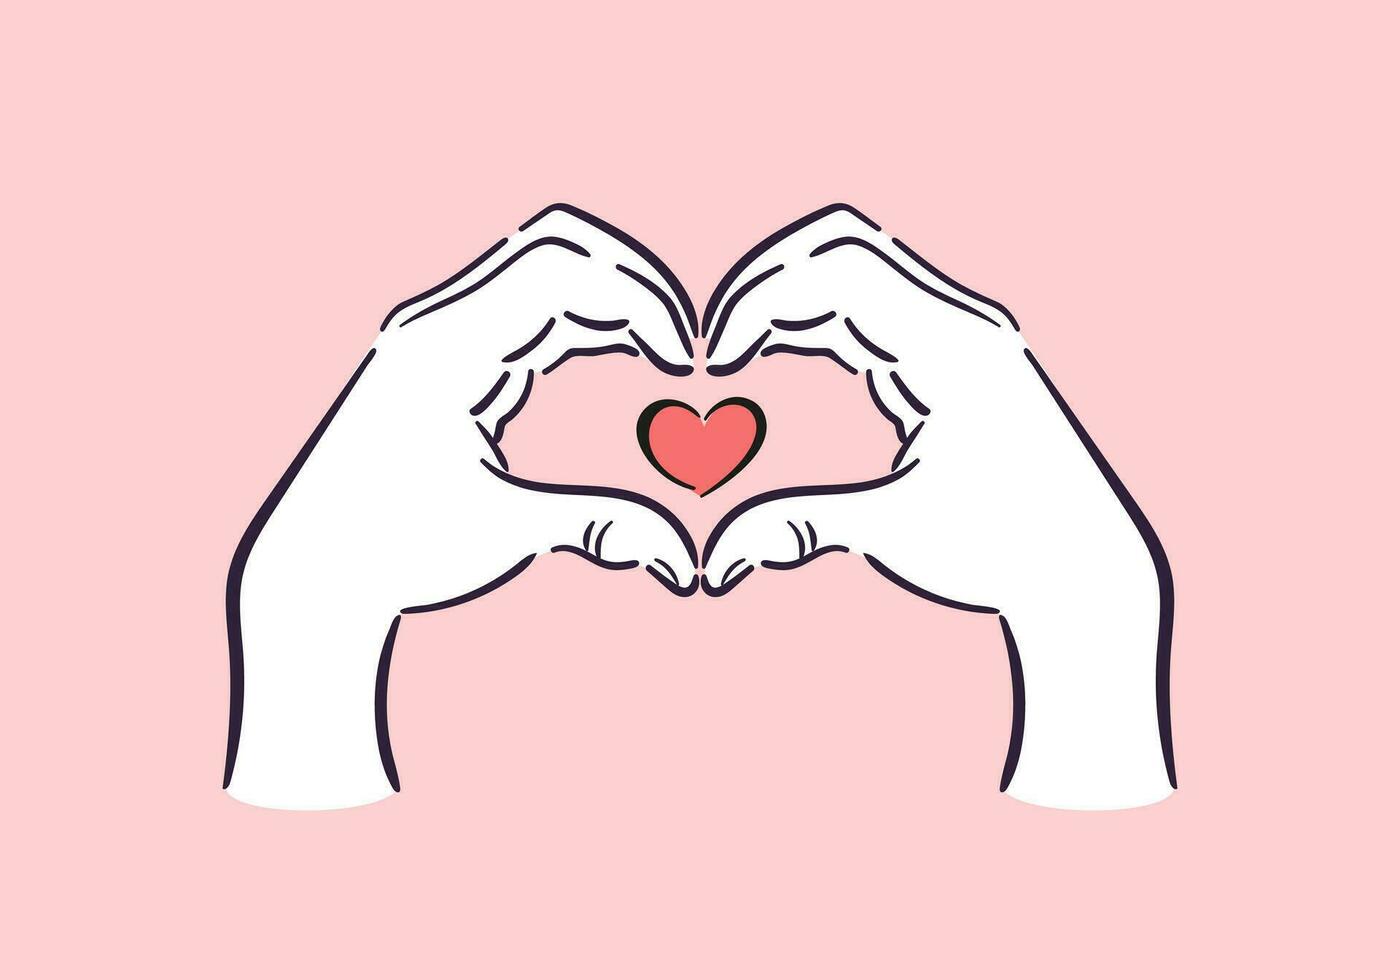 Hand Heart. Happy Valentines Day. gesture depicting love. Vector illustration in a sketchy minimalistic style. For posters, postcards, website, banners, design elements.